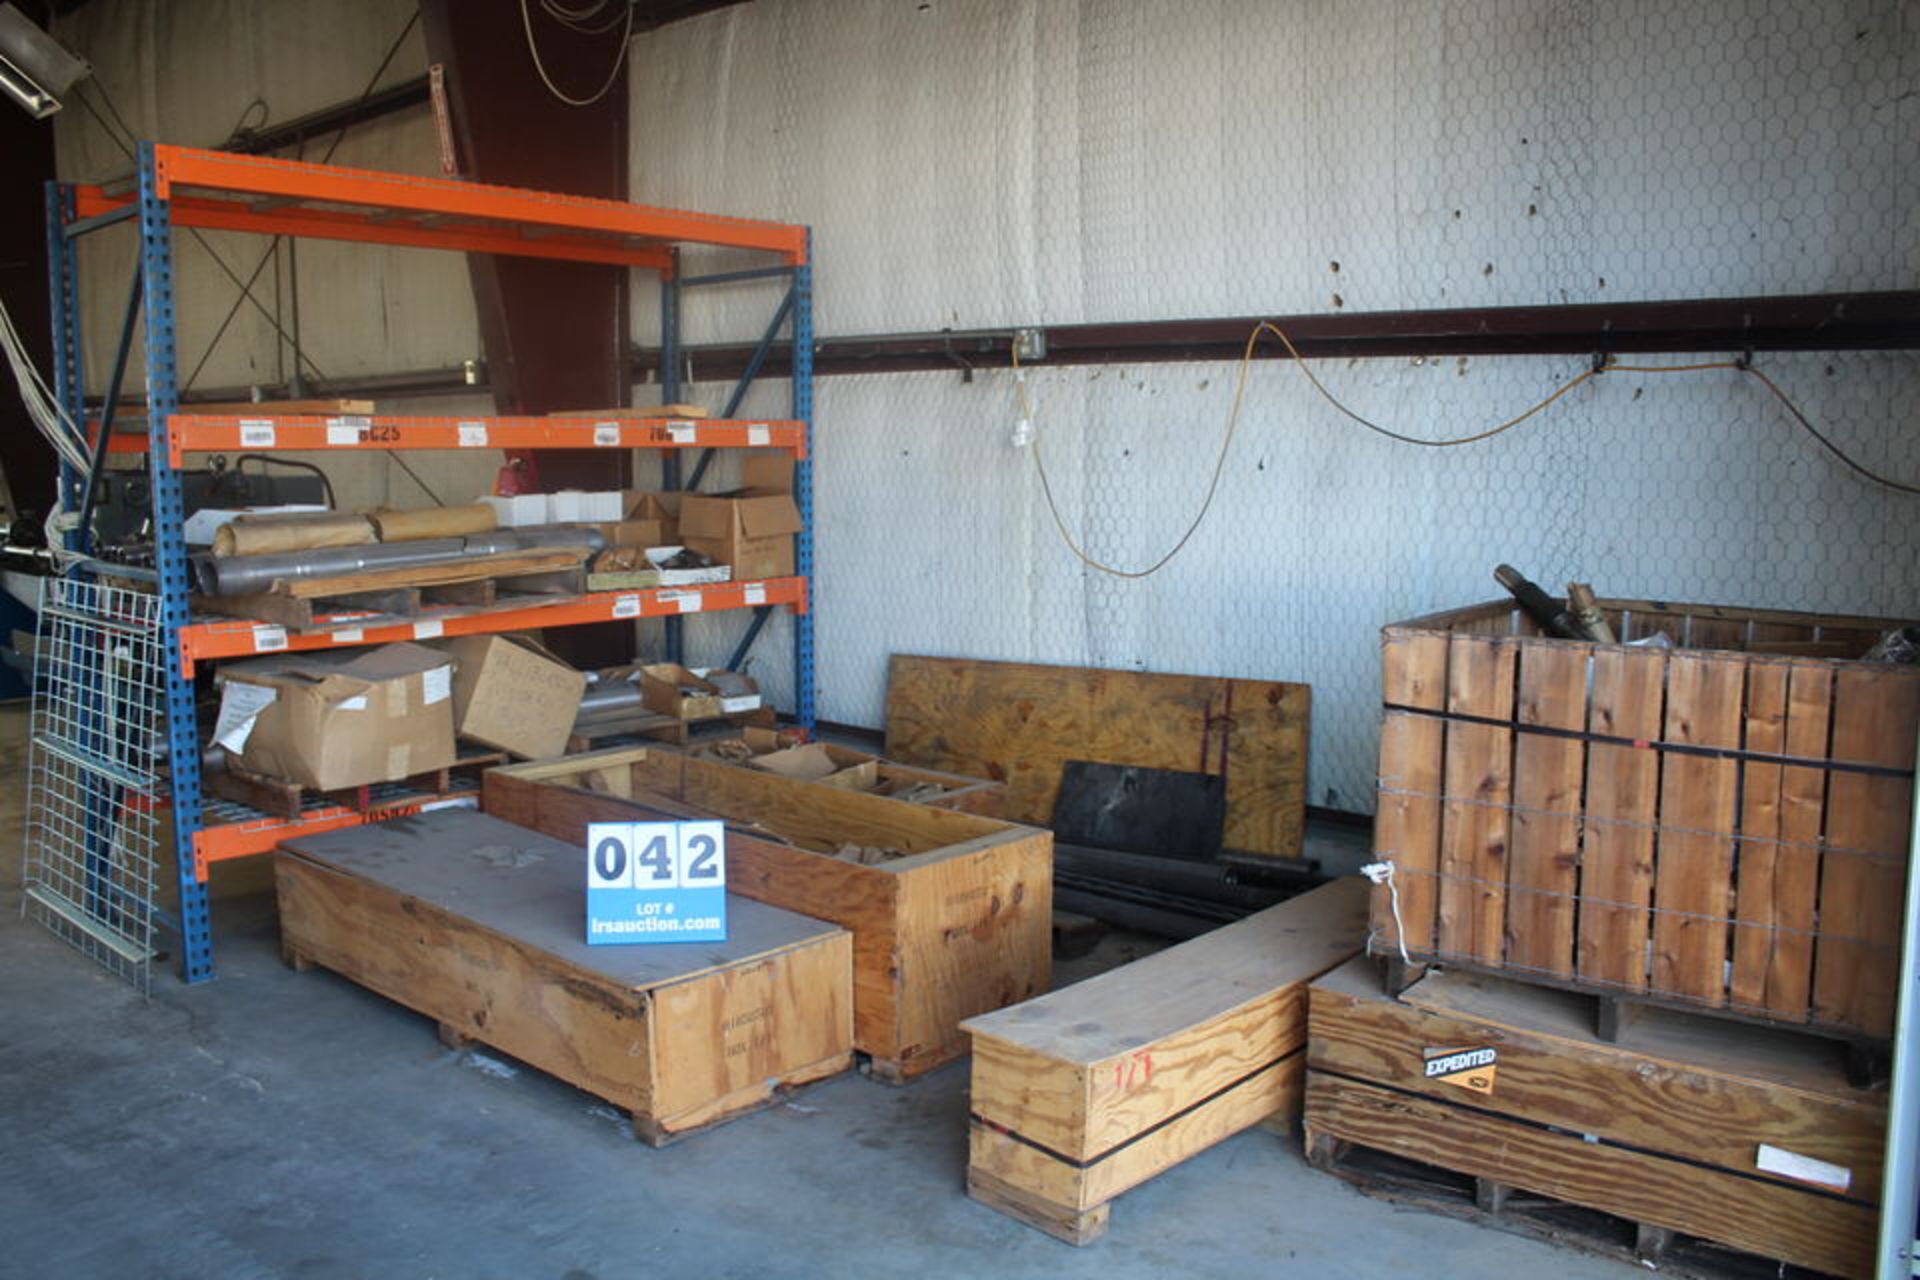 ALL INVENTORY THROUGHOUT BLDNG 'S ON PALLET RACKS *********** - Image 12 of 12